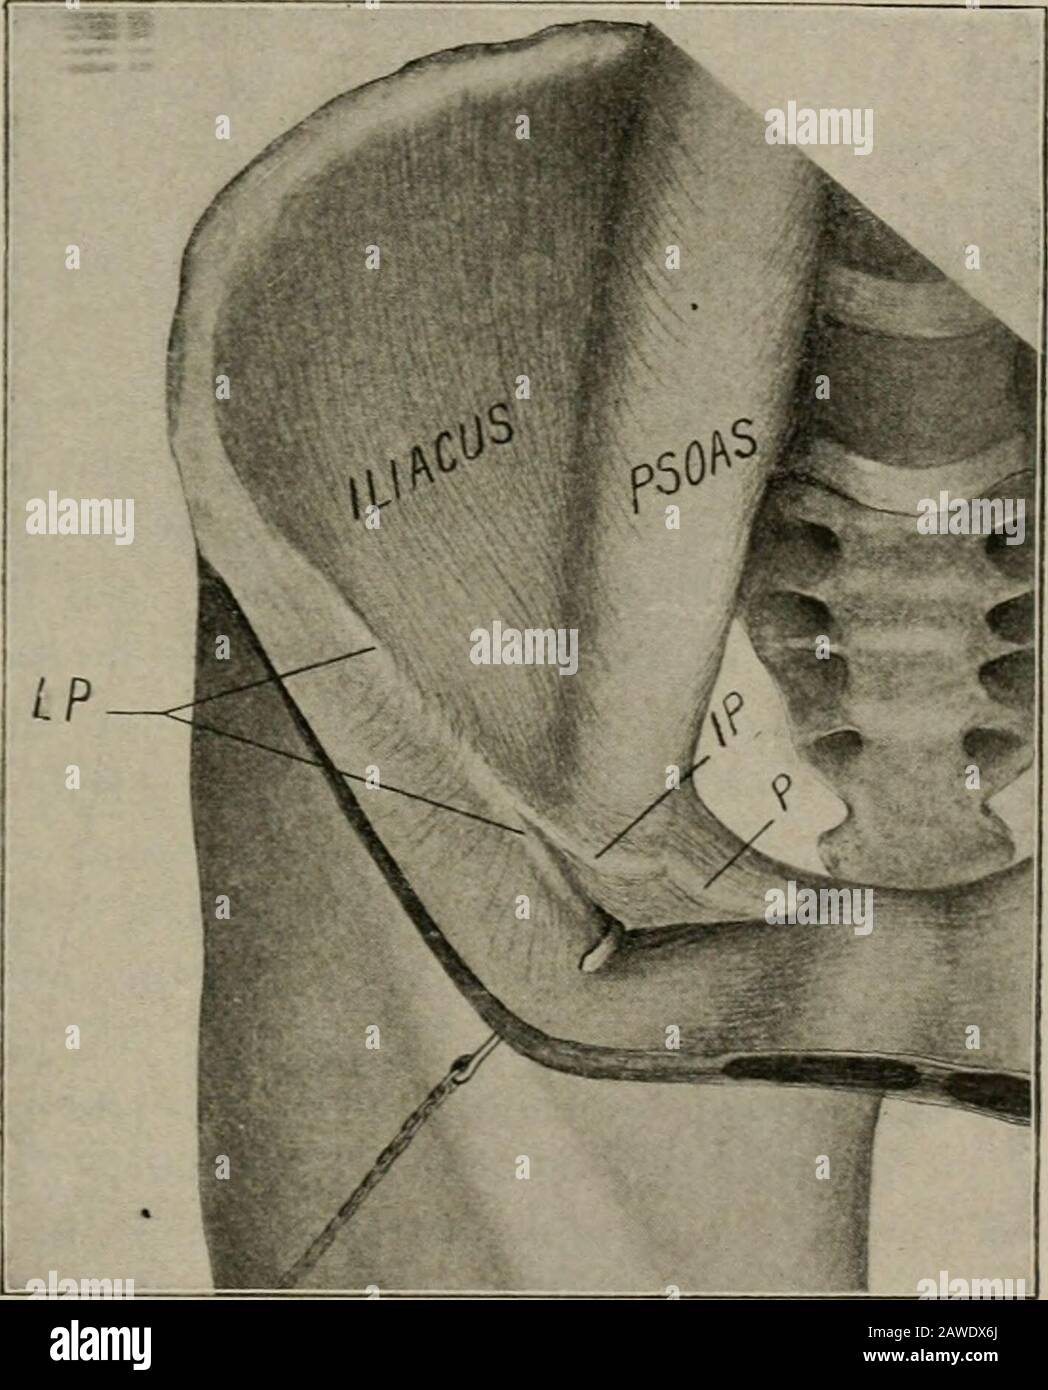 Operative surgery, for students and practitioners . Fig. 273.—The Pelvis  and Ligaments of the Ilio-pubic Region. FS, femoralspace; G, Gimbernats  ligament; IP, ilio-pectineal ligament; IPS; ilio-psoasspace; P, Pouparts  ligament; PS, pubic spine..